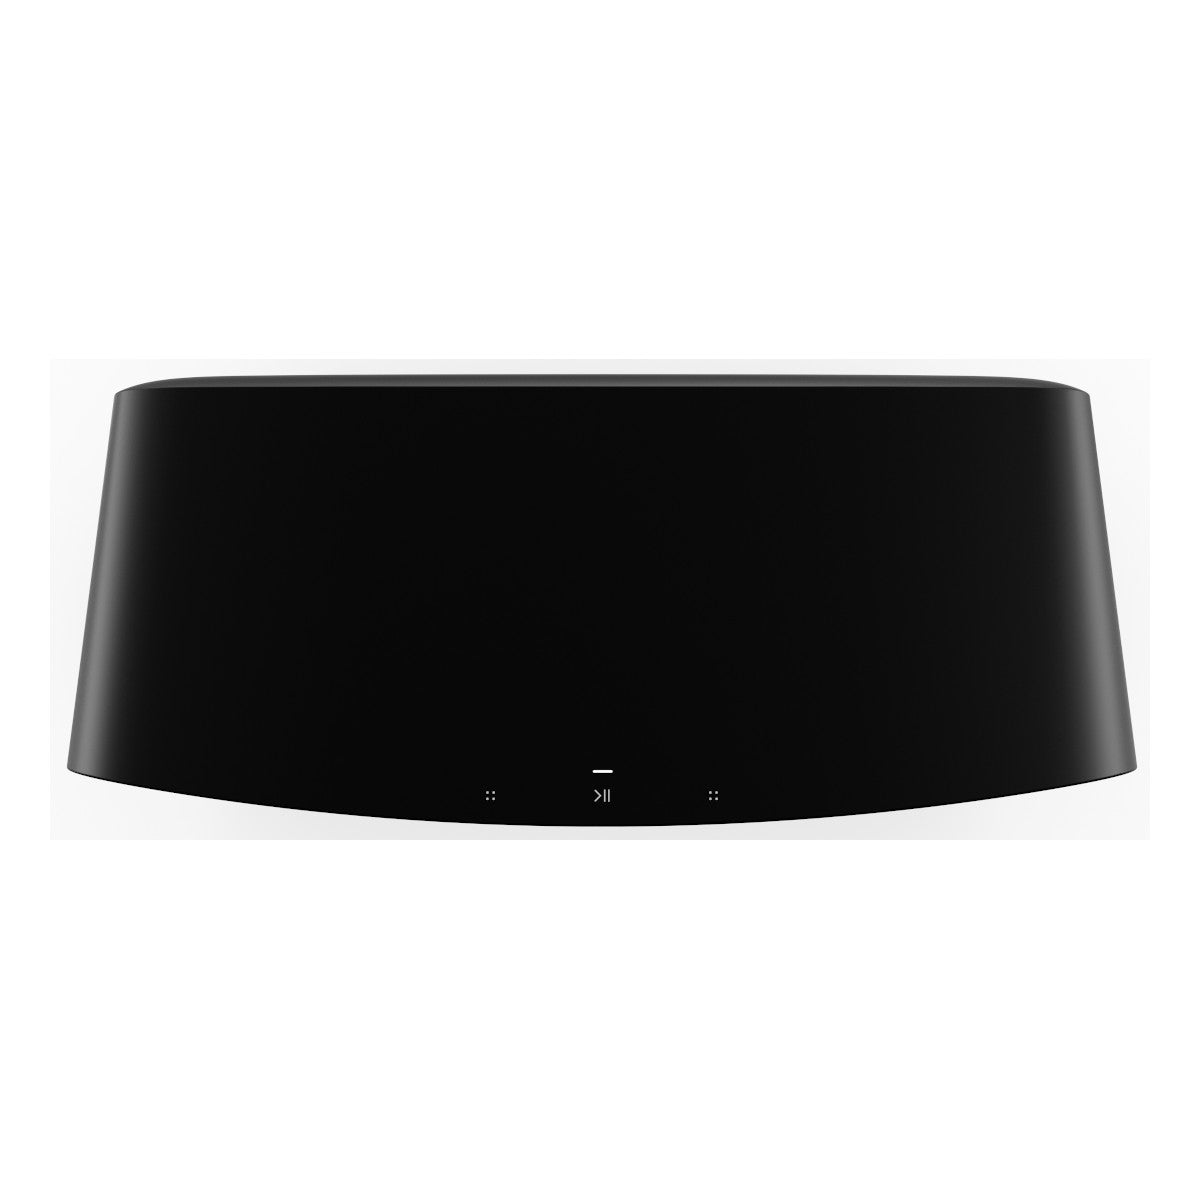 Victrola Stream Carbon Turntable with Sonos Five Wireless Speaker for Streaming Music (Black)